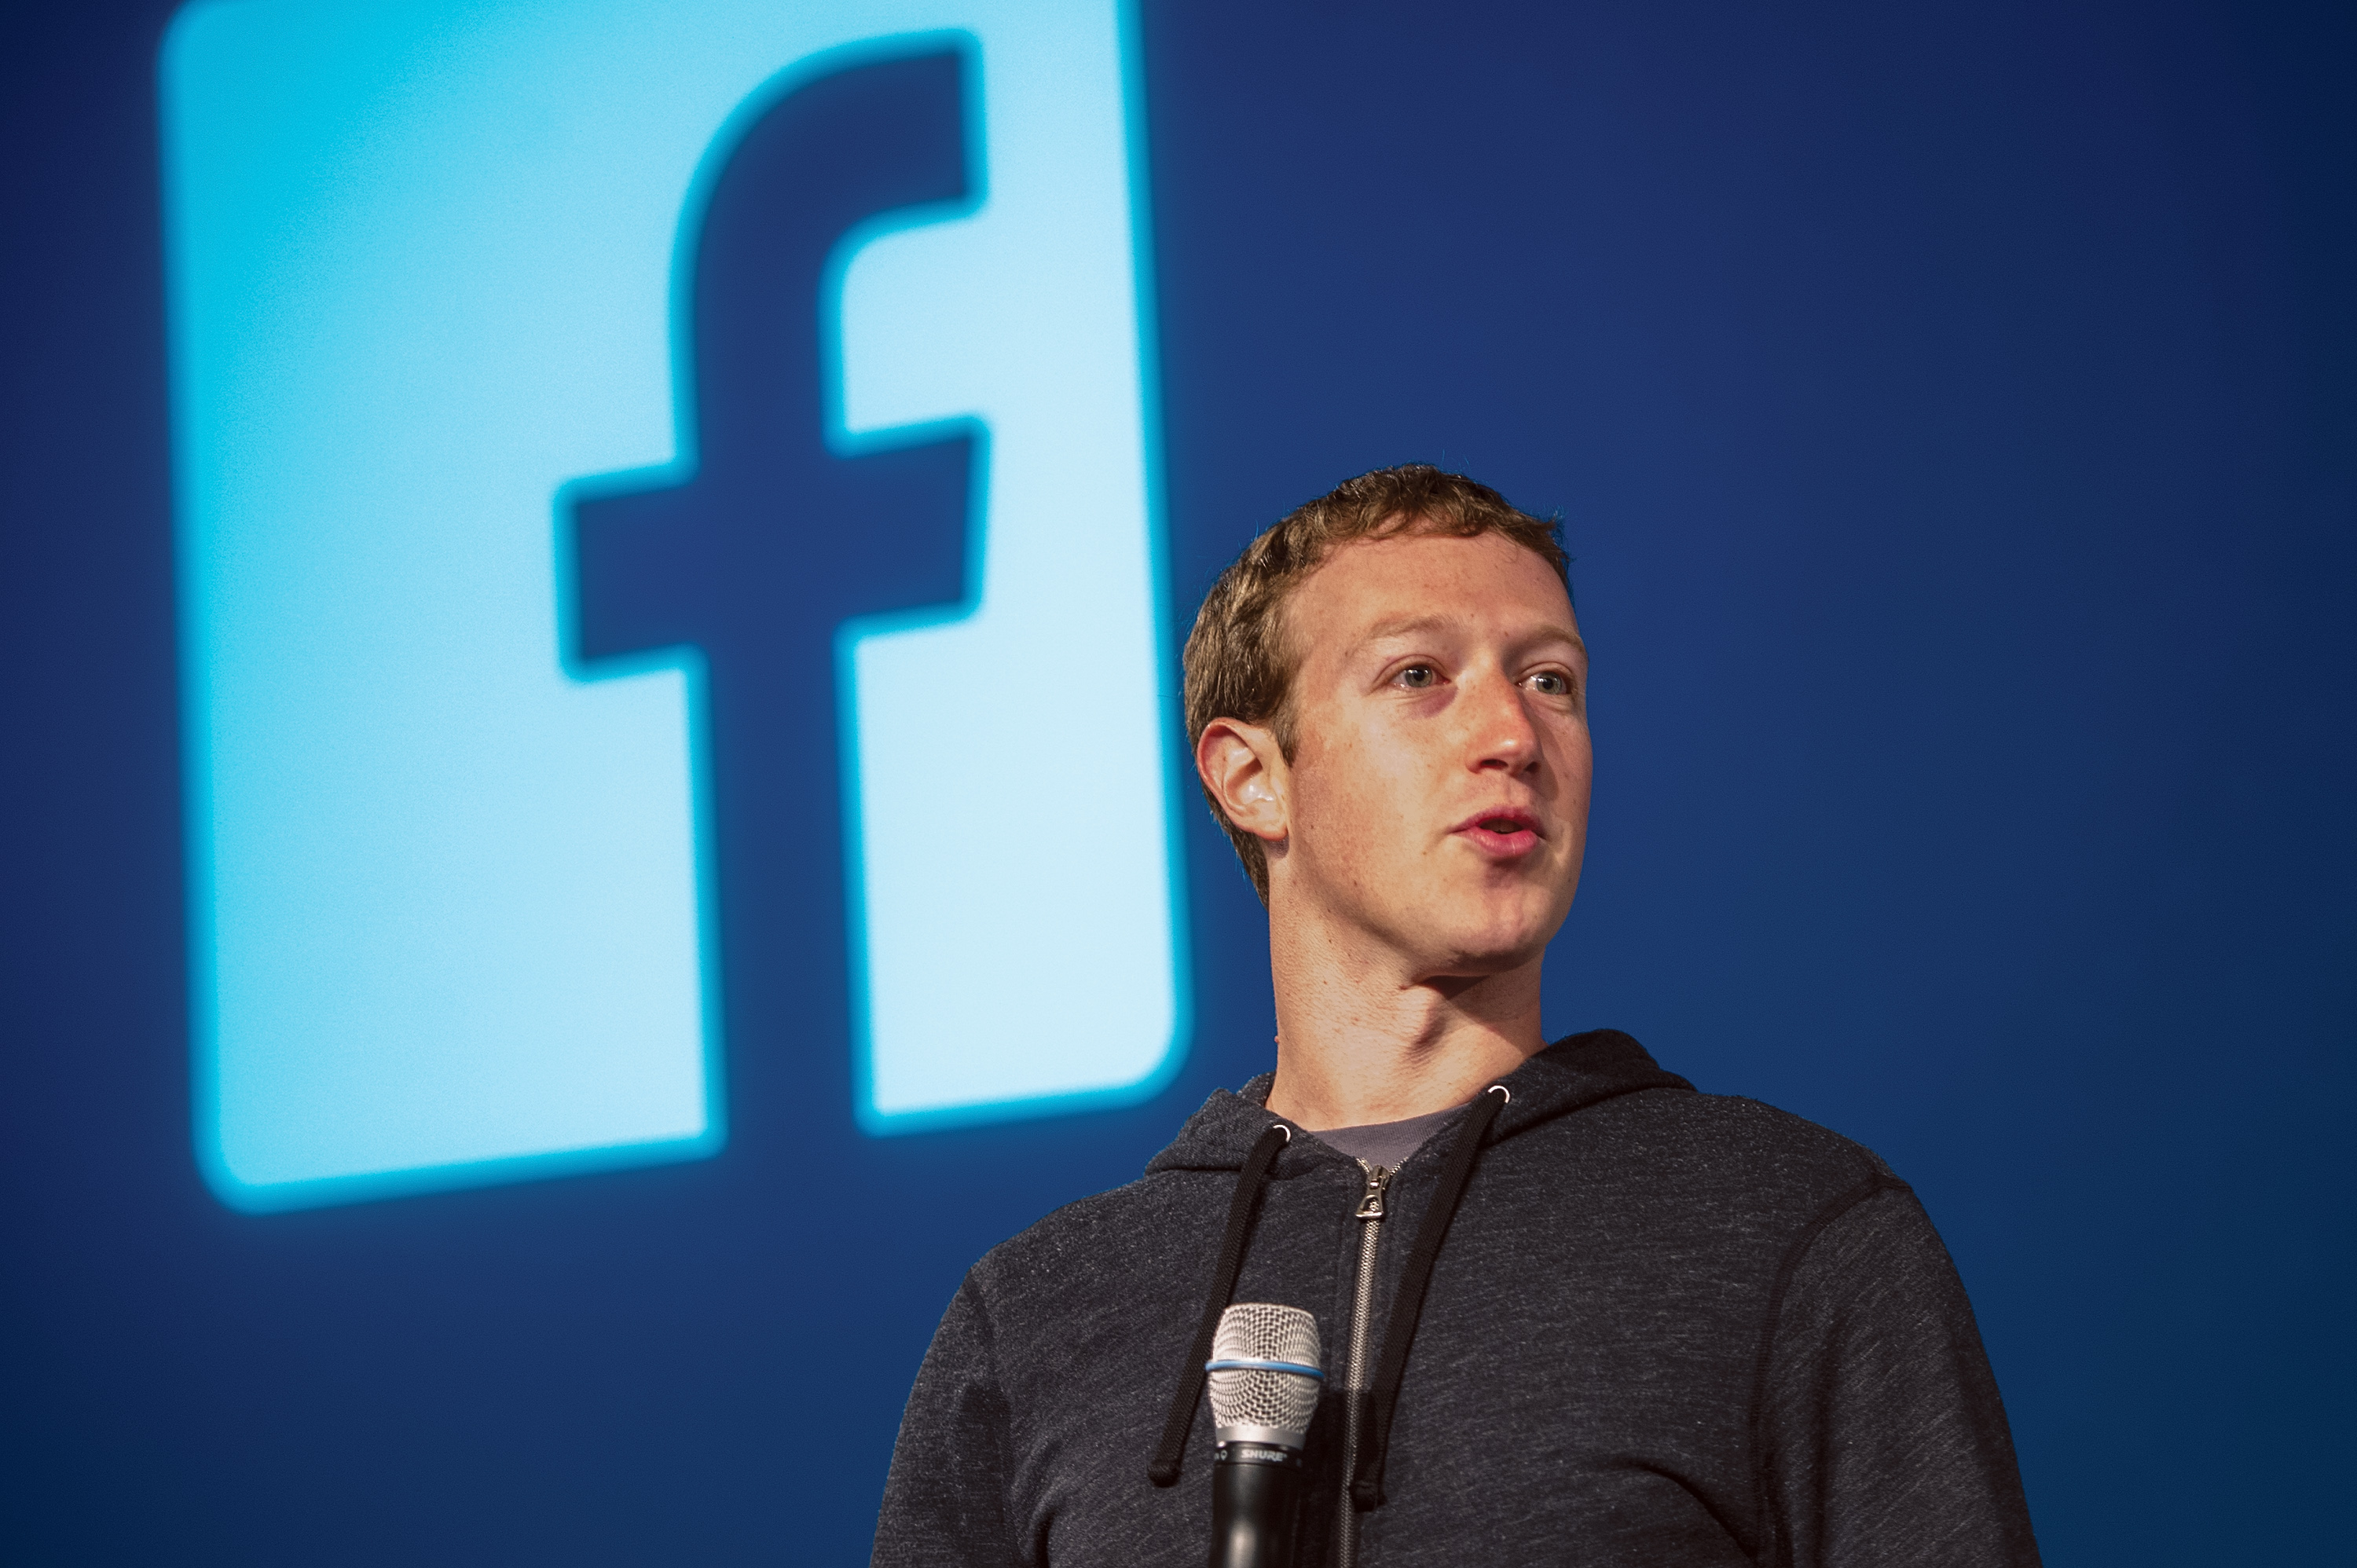 Mark Zuckerberg, chief executive officer and founder of Facebook Inc., speaks during an event at the company's headquarters in Menlo Park, Calif. on March 7, 2013.